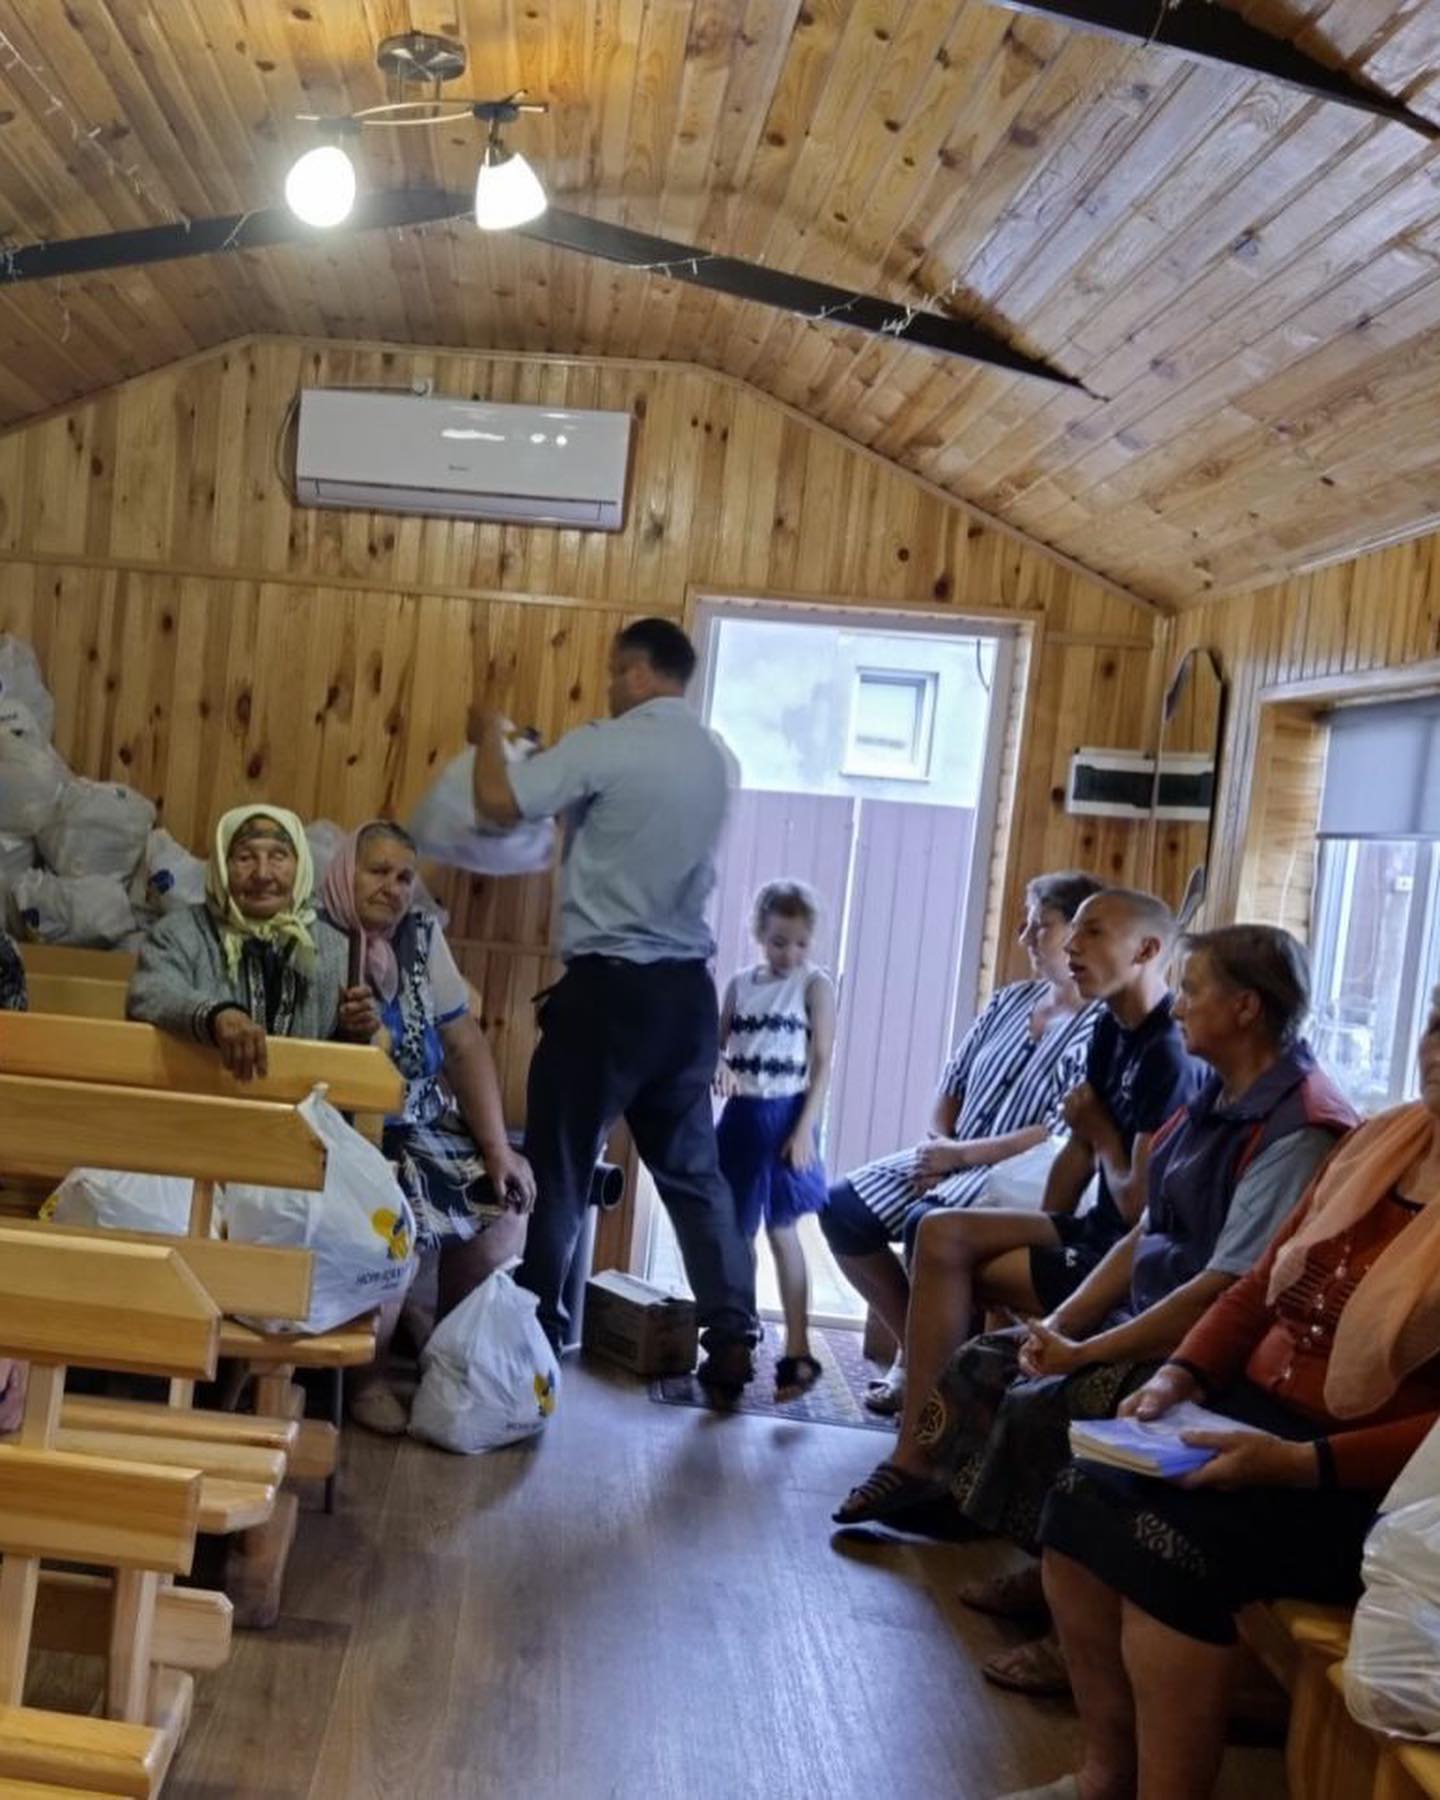 a group of people sitting in a wooden cabin.